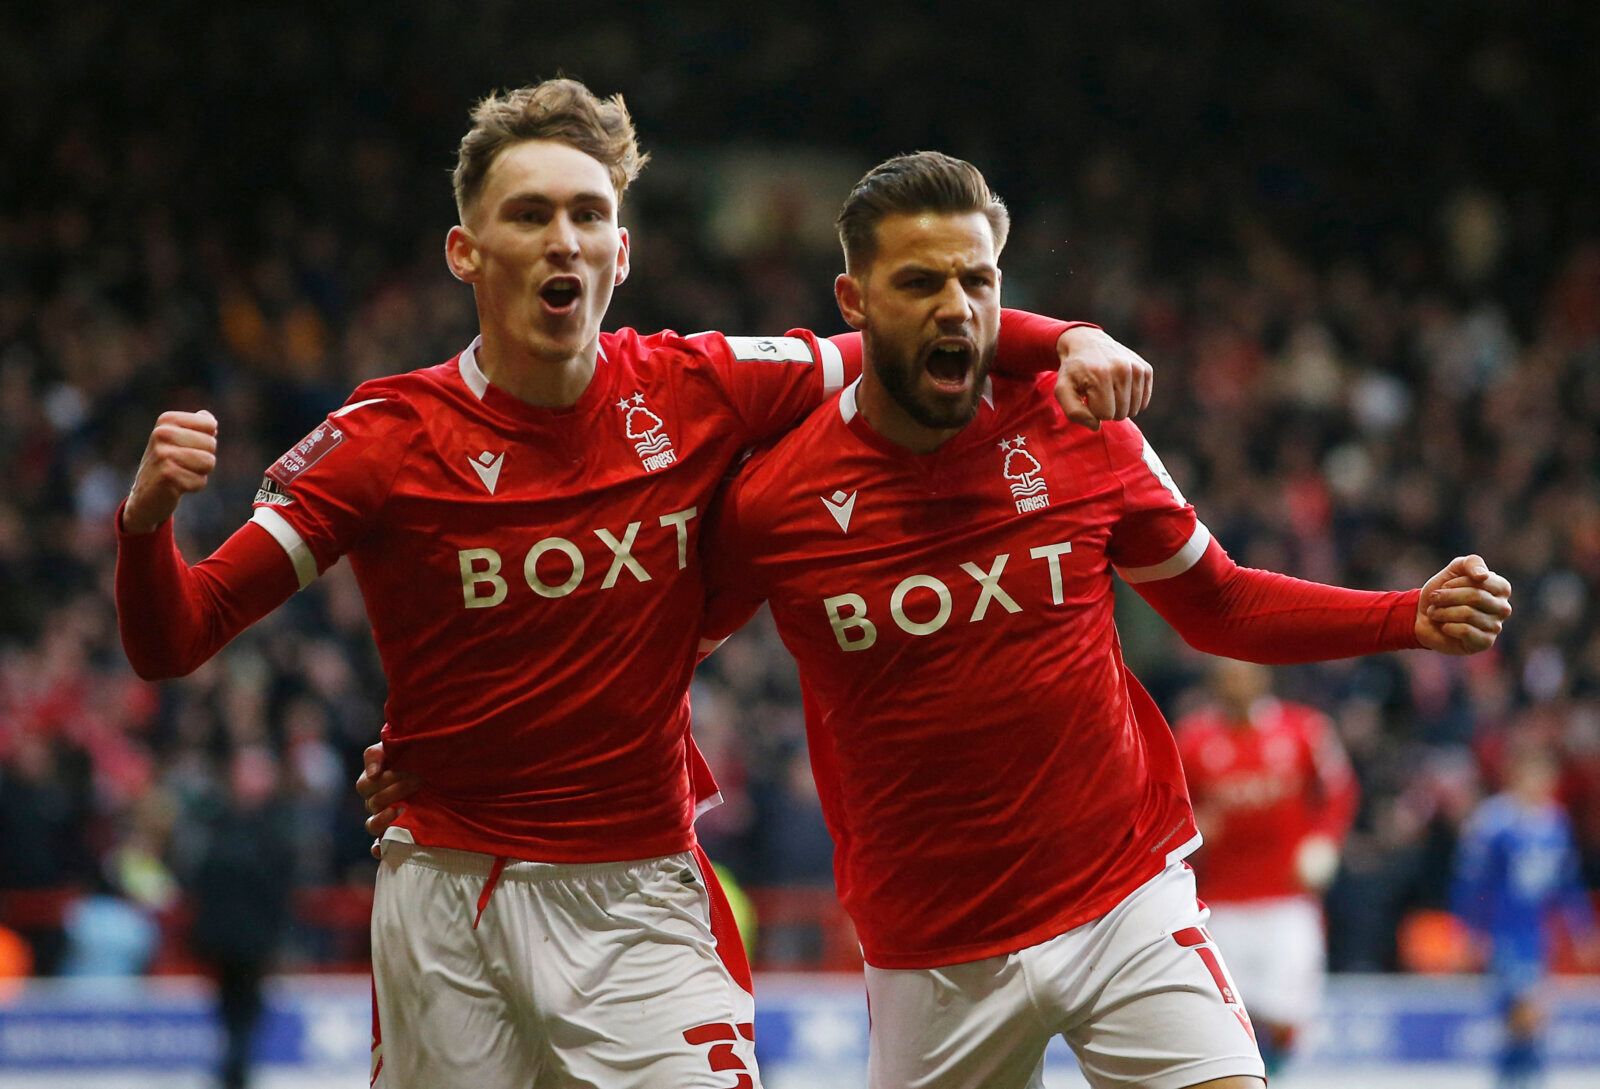 Soccer Football - FA Cup - Fourth Round - Nottingham Forest v Leicester City - The City Ground, Nottingham, Britain - February 6, 2022 Nottingham Forest's Philip Zinckernagel celebrates scoring their first goal with James Garner REUTERS/Craig Brough